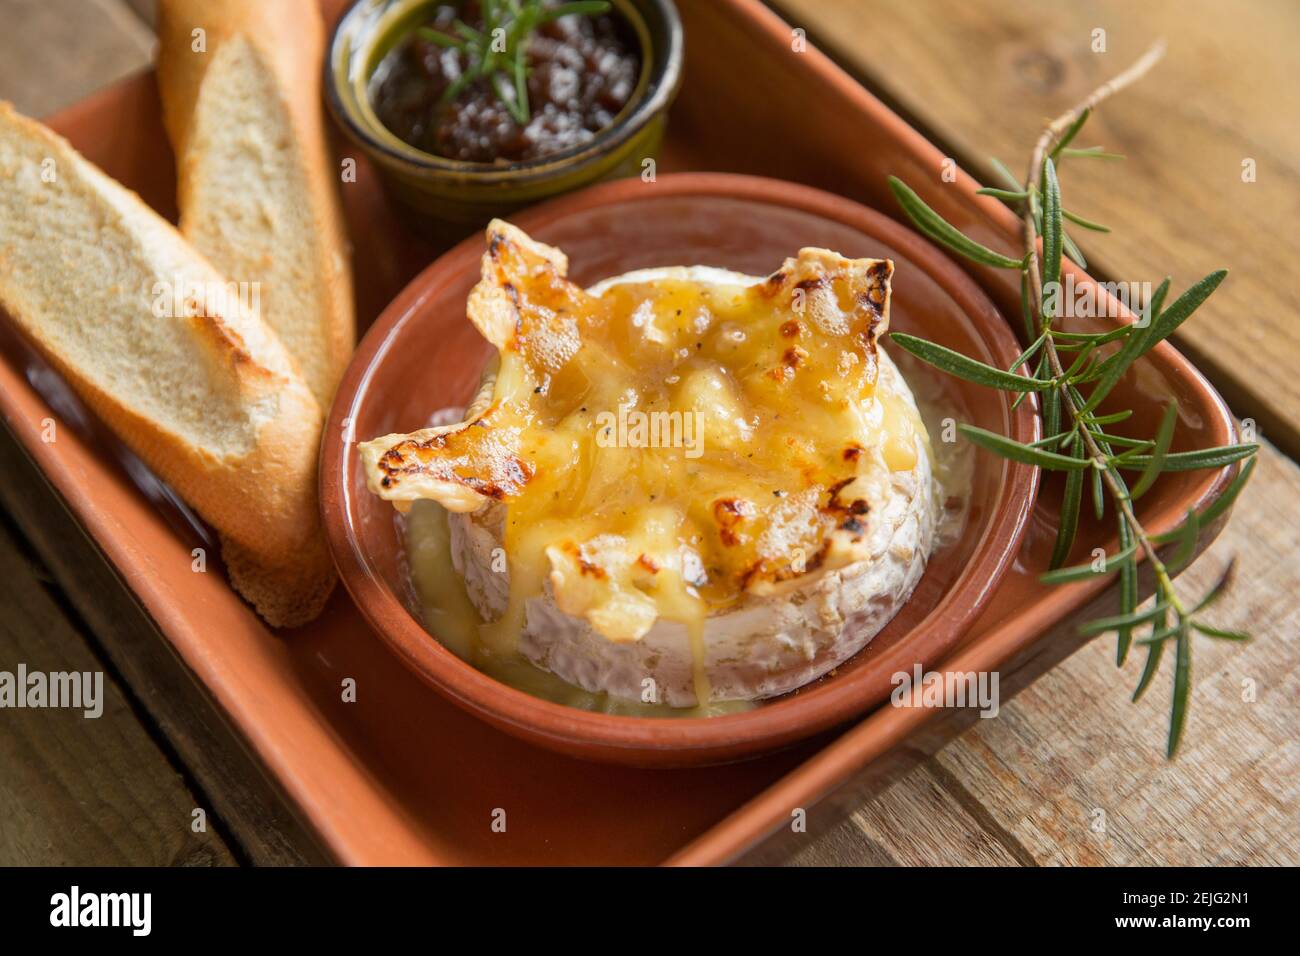 French Camembert that has been baked in an oven with a truffle, garlic and honey sauce, served with toasted French bread and caramelised onion chutney Stock Photo